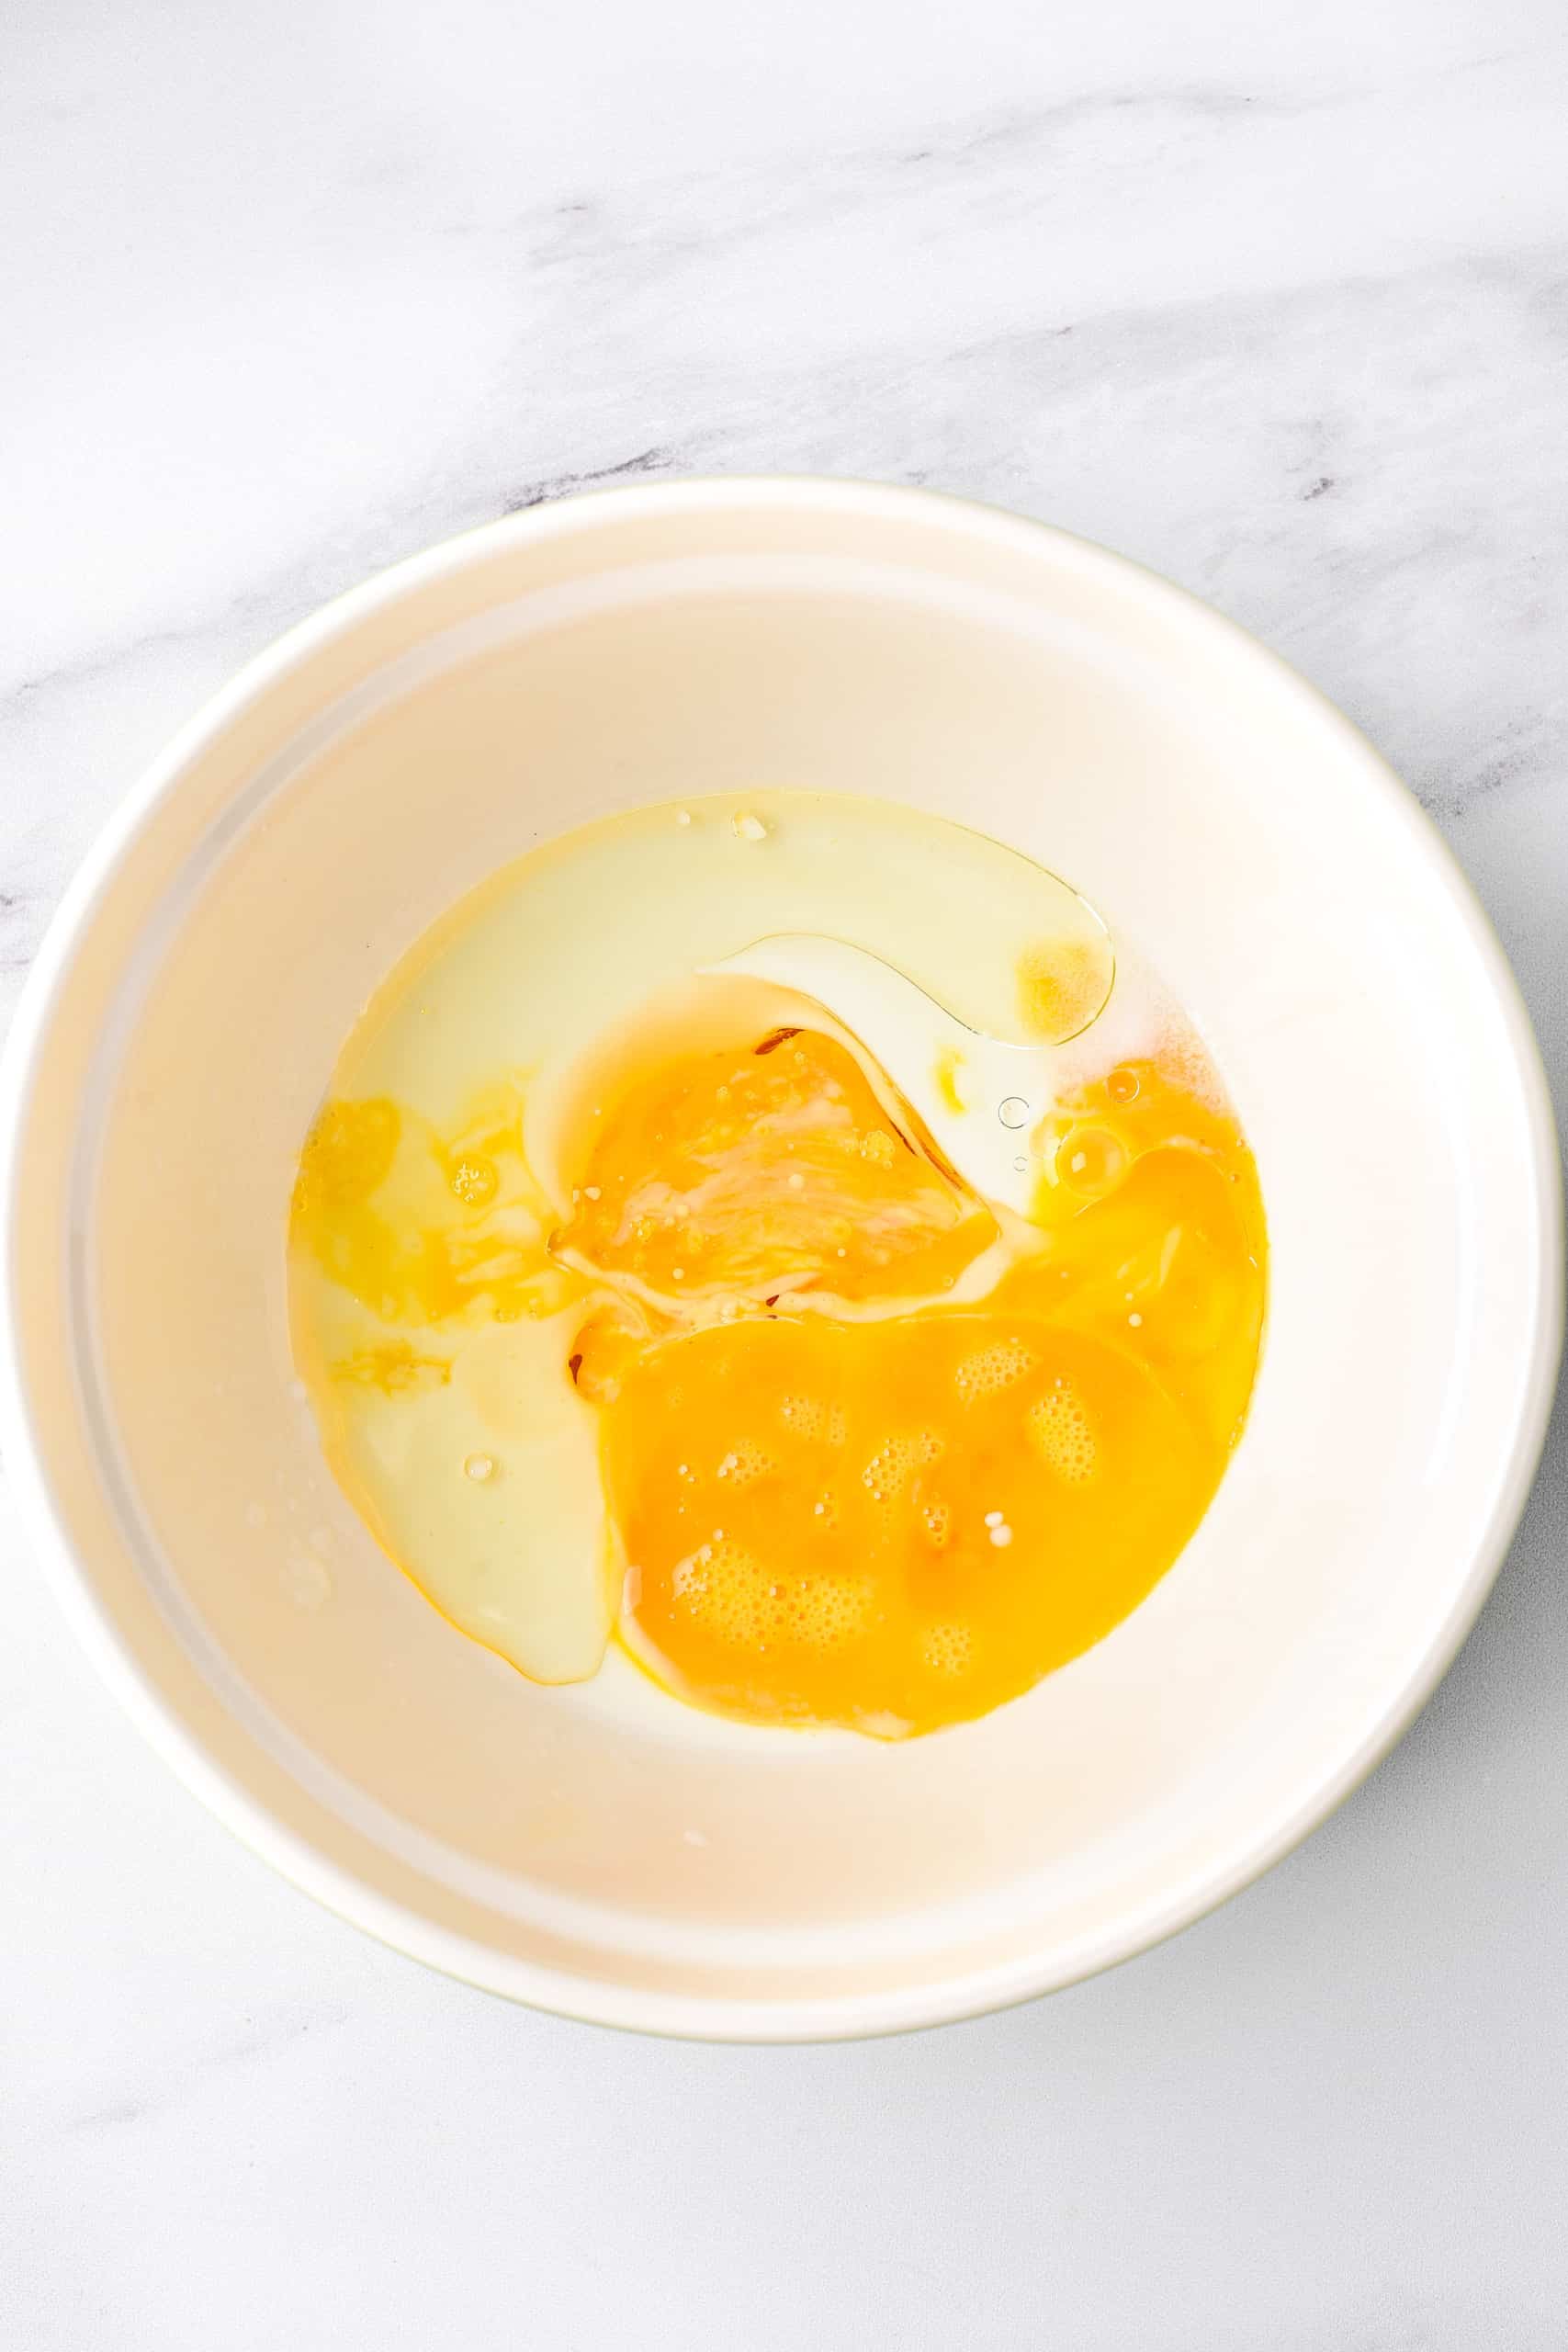 Egg mixture in white bowl.